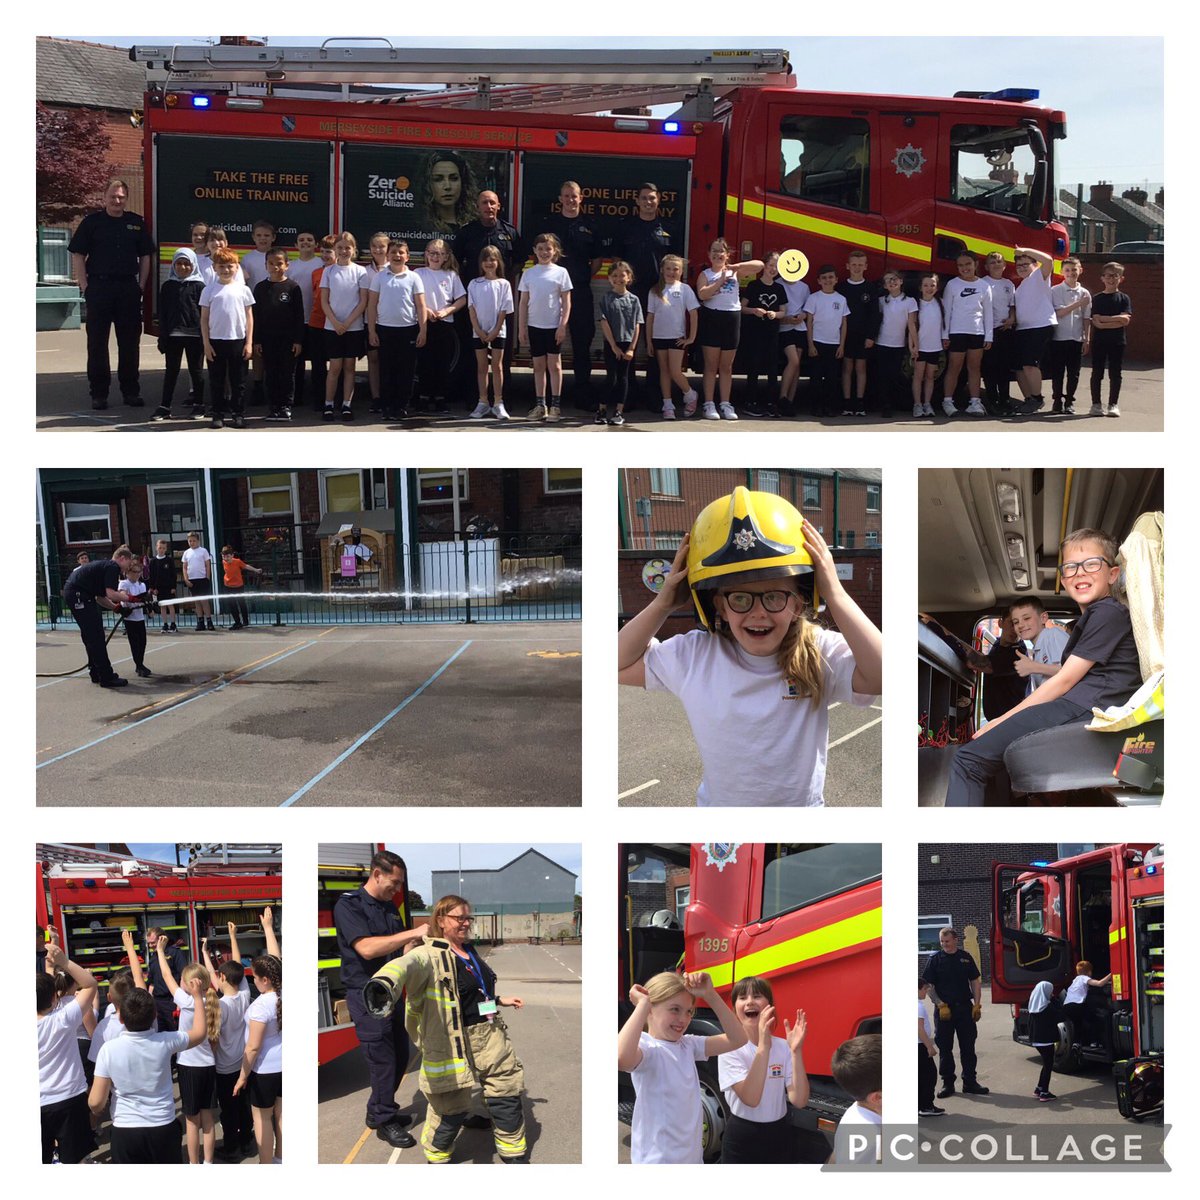 Thank you @MerseyFire for taking the time yesterday to teach Y4 about being a member of the fire service and fire safety. You can see from all the excited faces, it will be a visit they remember! #ParishPride #SafetyWeek